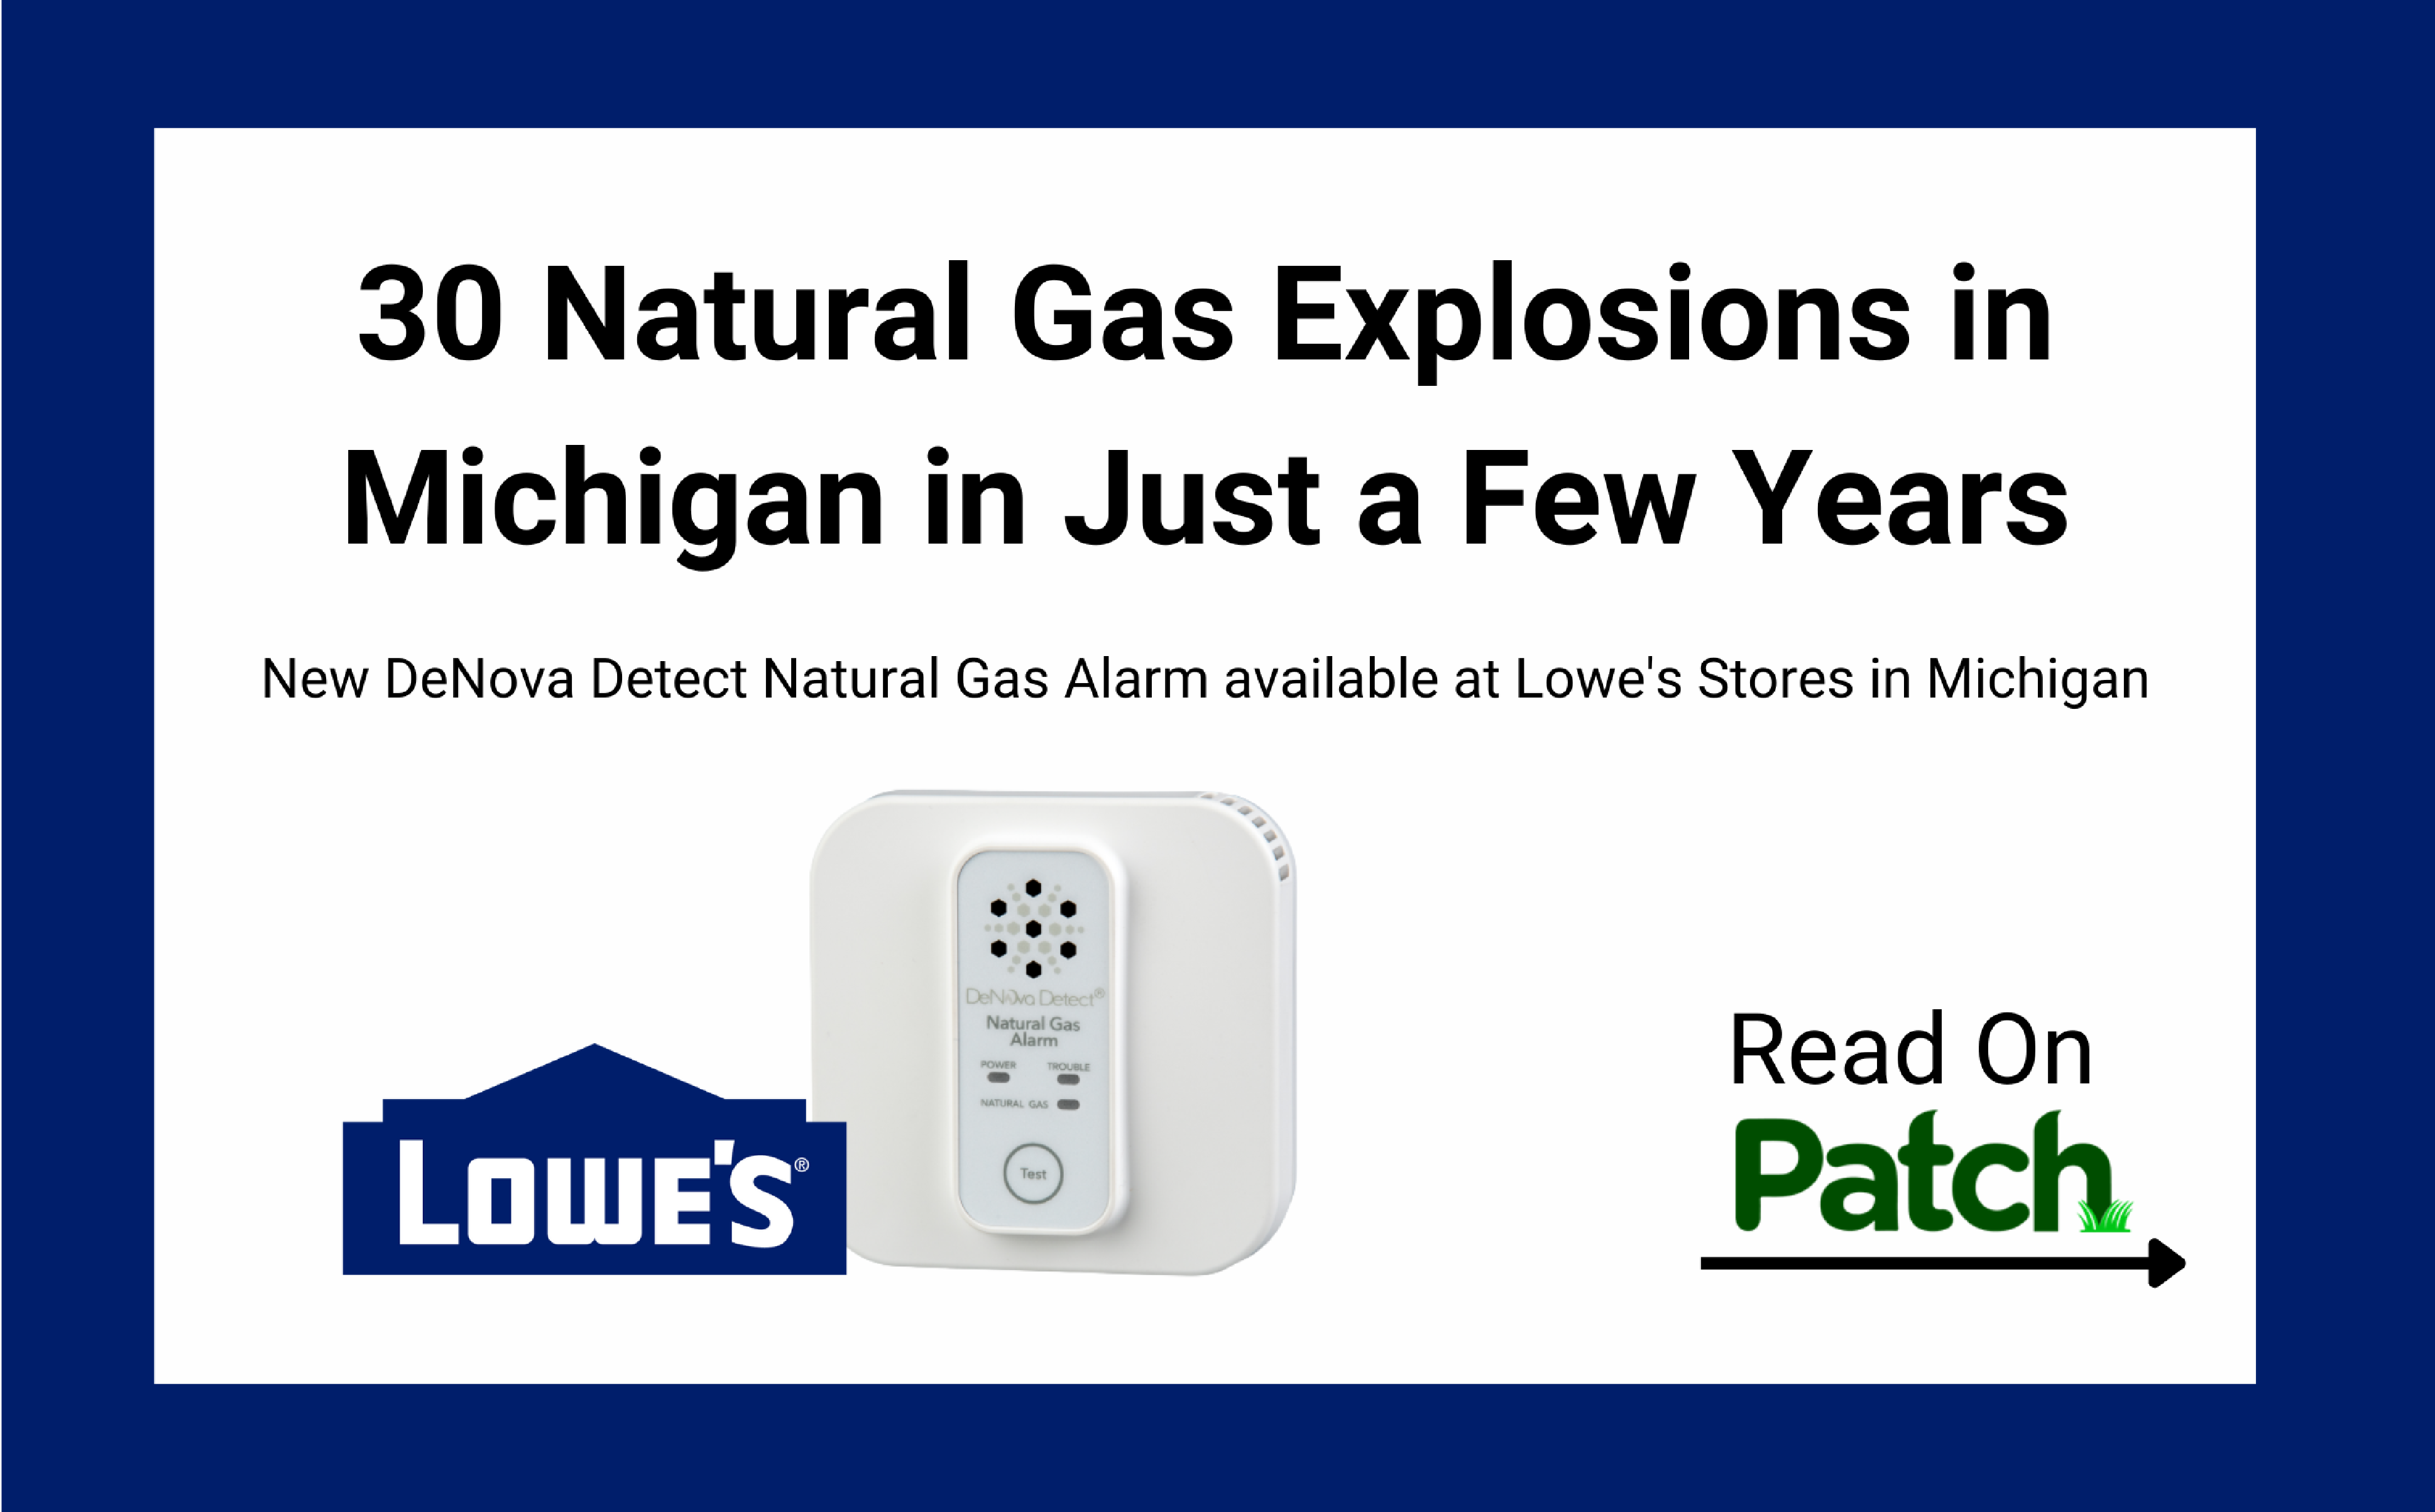 Thirty Natural Gas Explosions in Michigan in Just a Few Years - The DeNova Detect Natural Gas Alarm Can Help Prevent Future Incidents